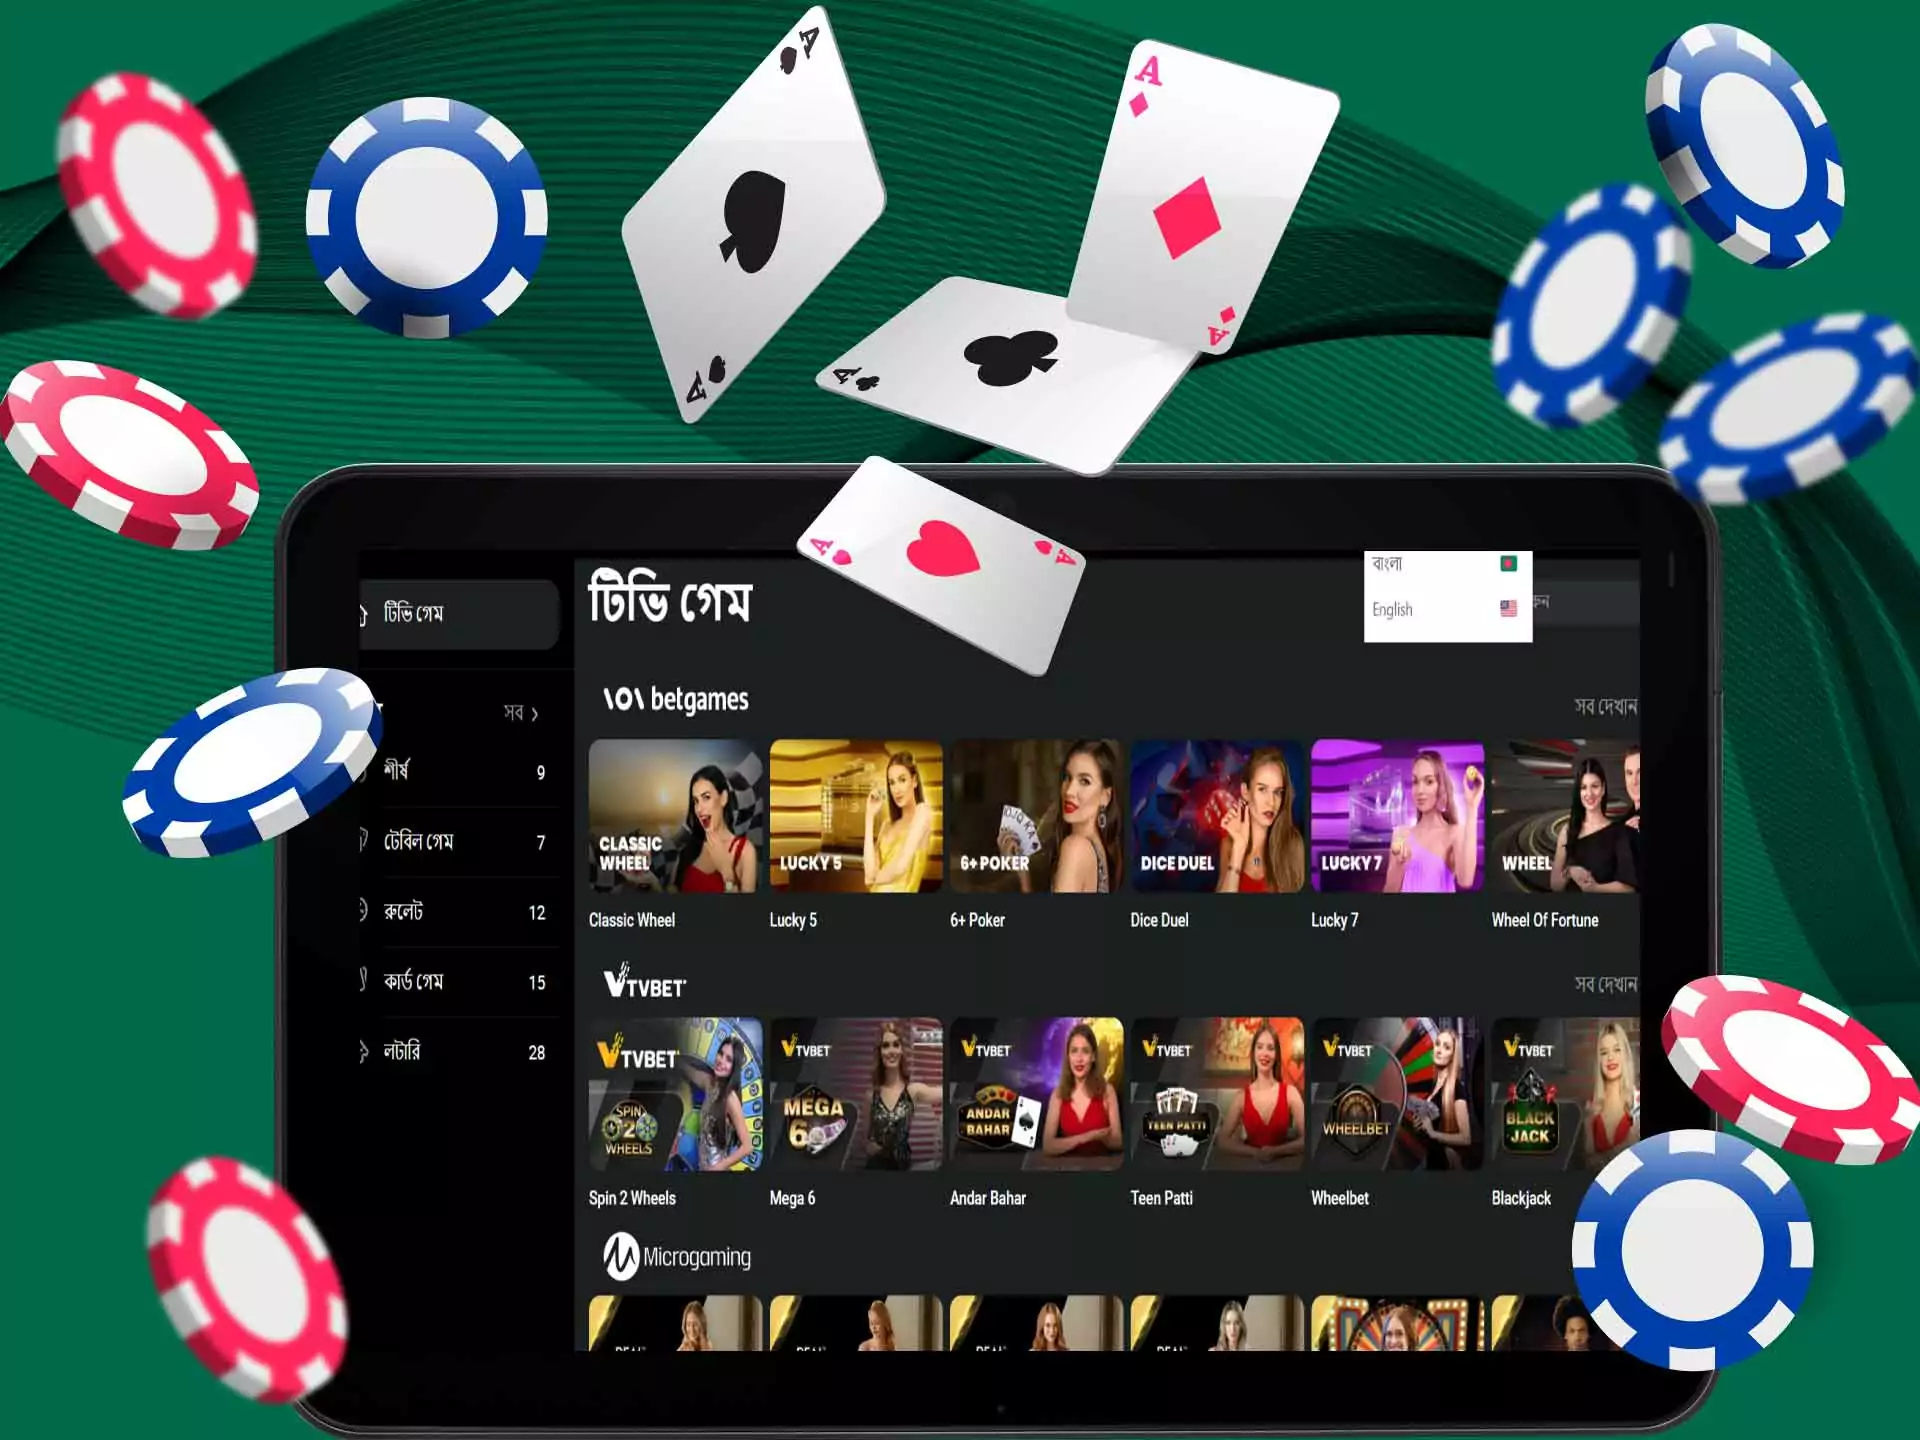 You will find a lot of casino games and entertainments at Parimatch.